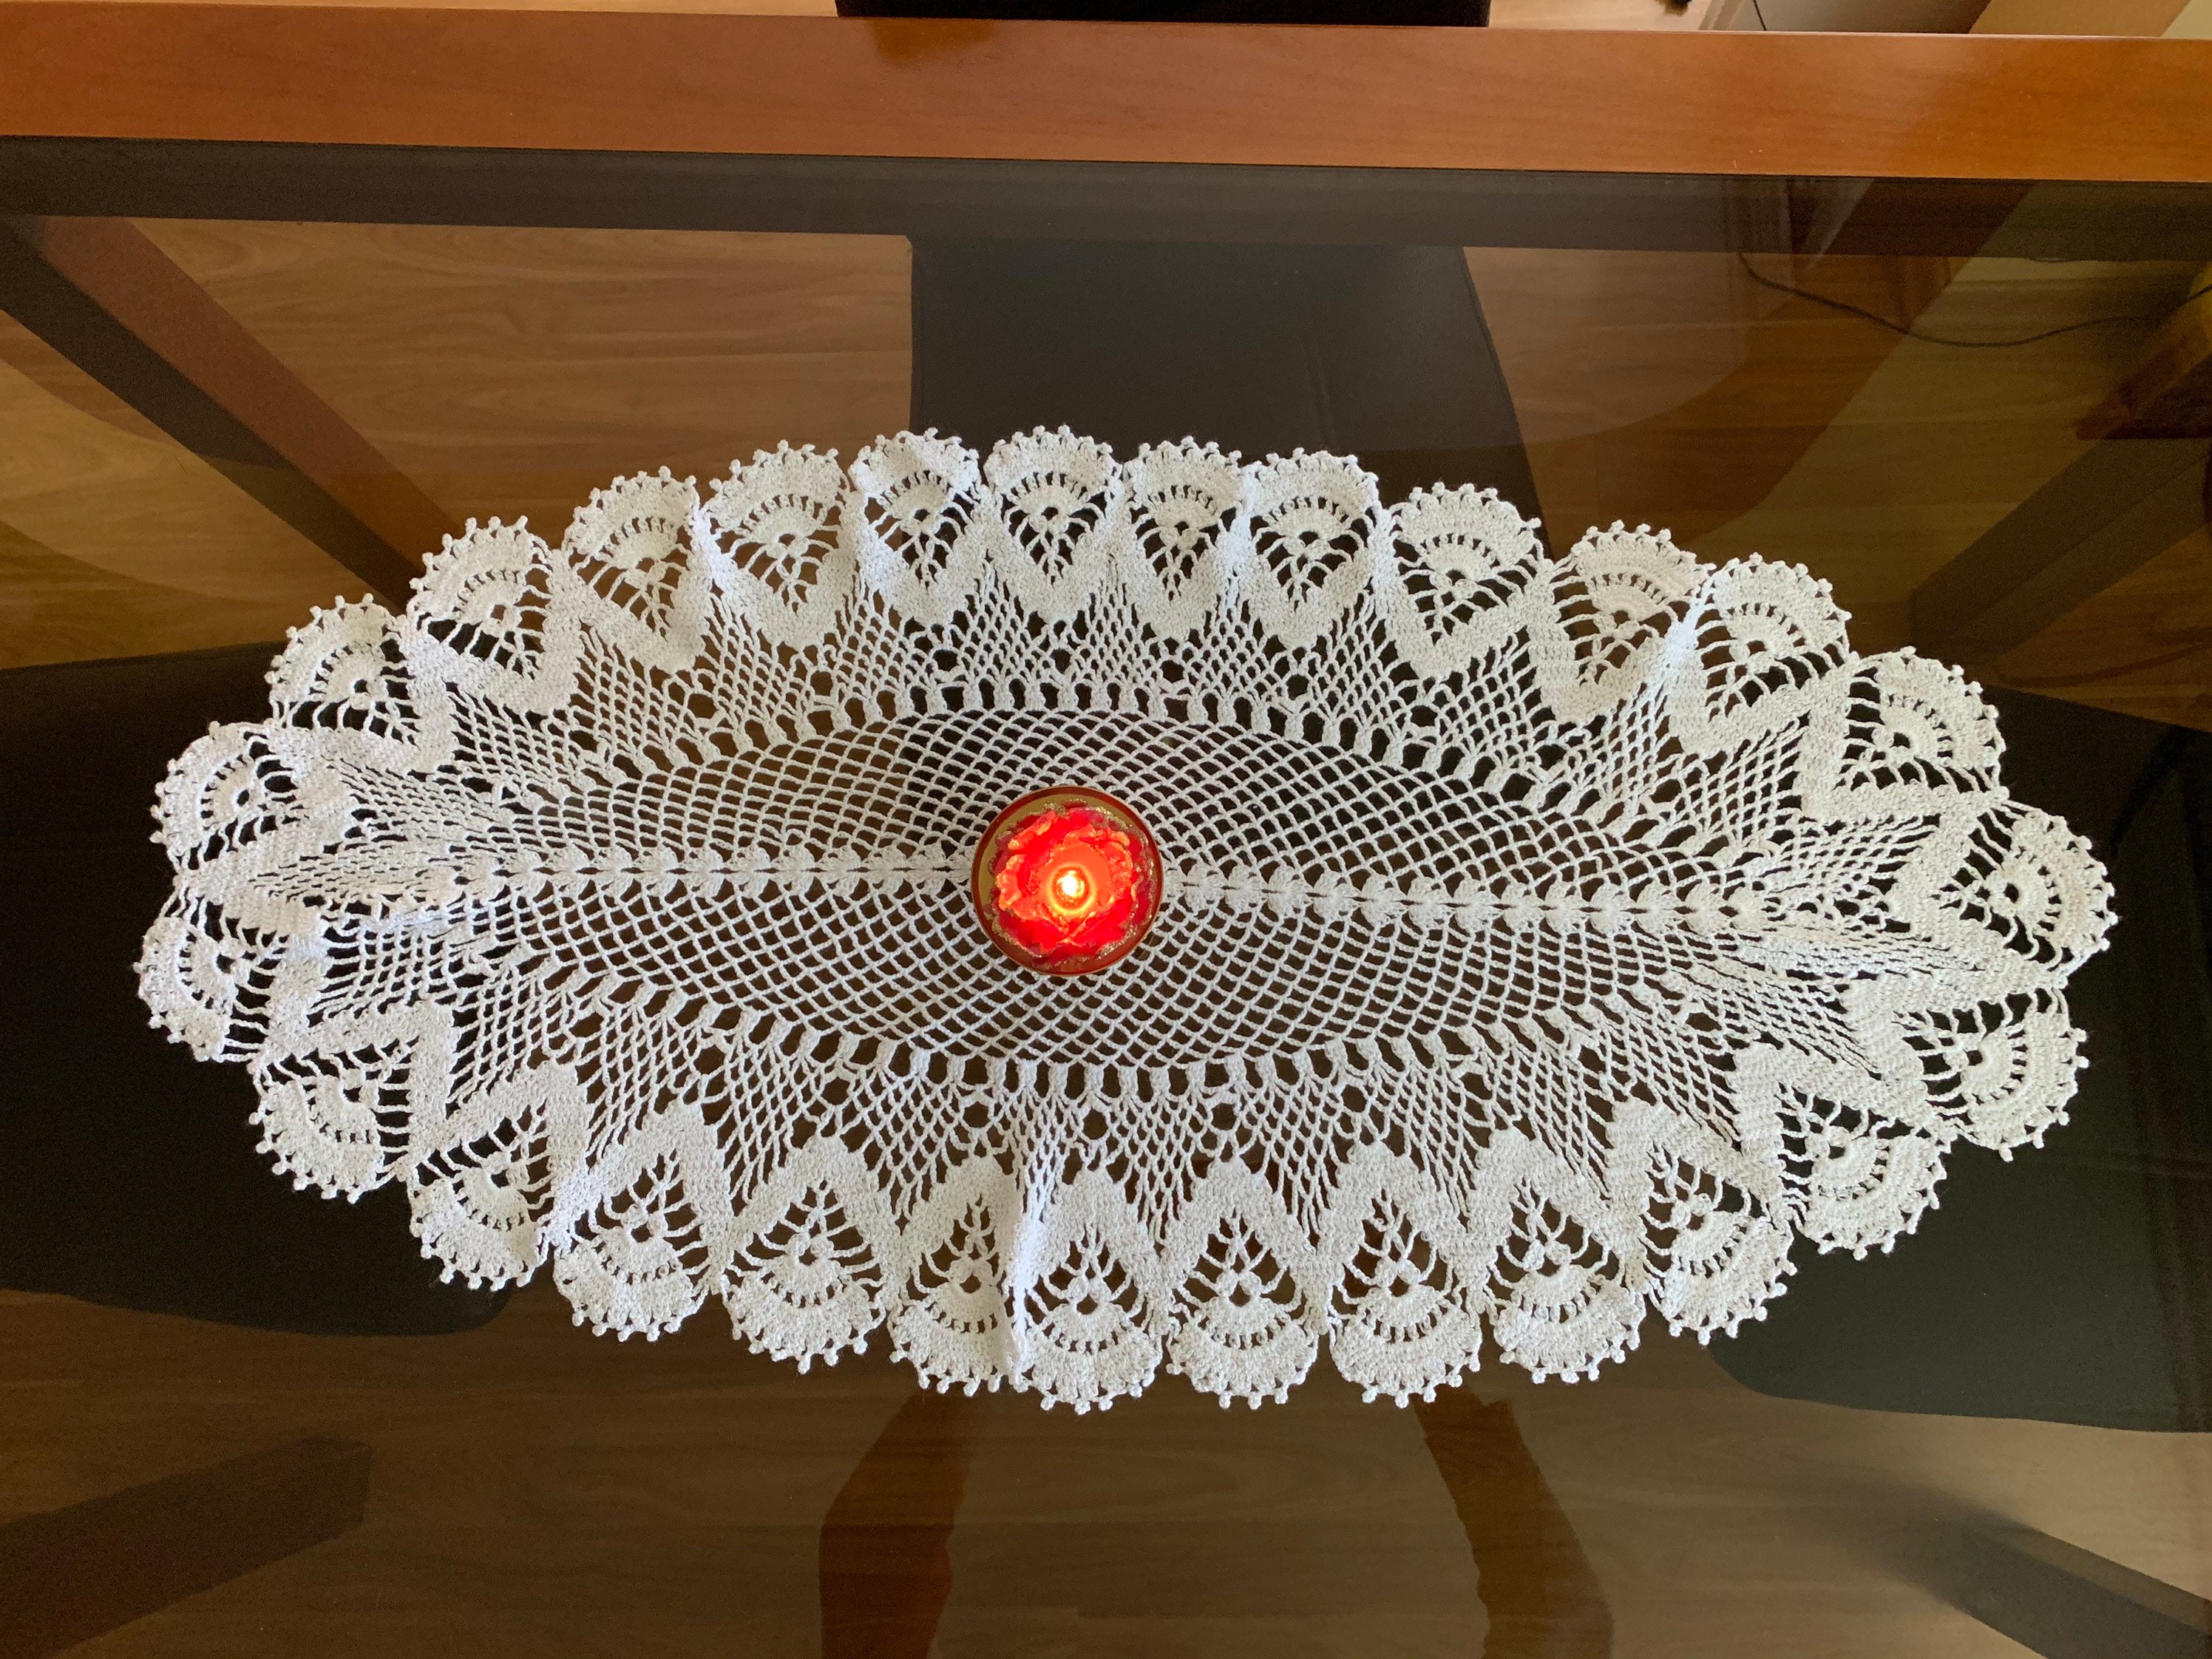 You Can Make A Lace Bowl From A Crocheted Doily! - creative jewish mom